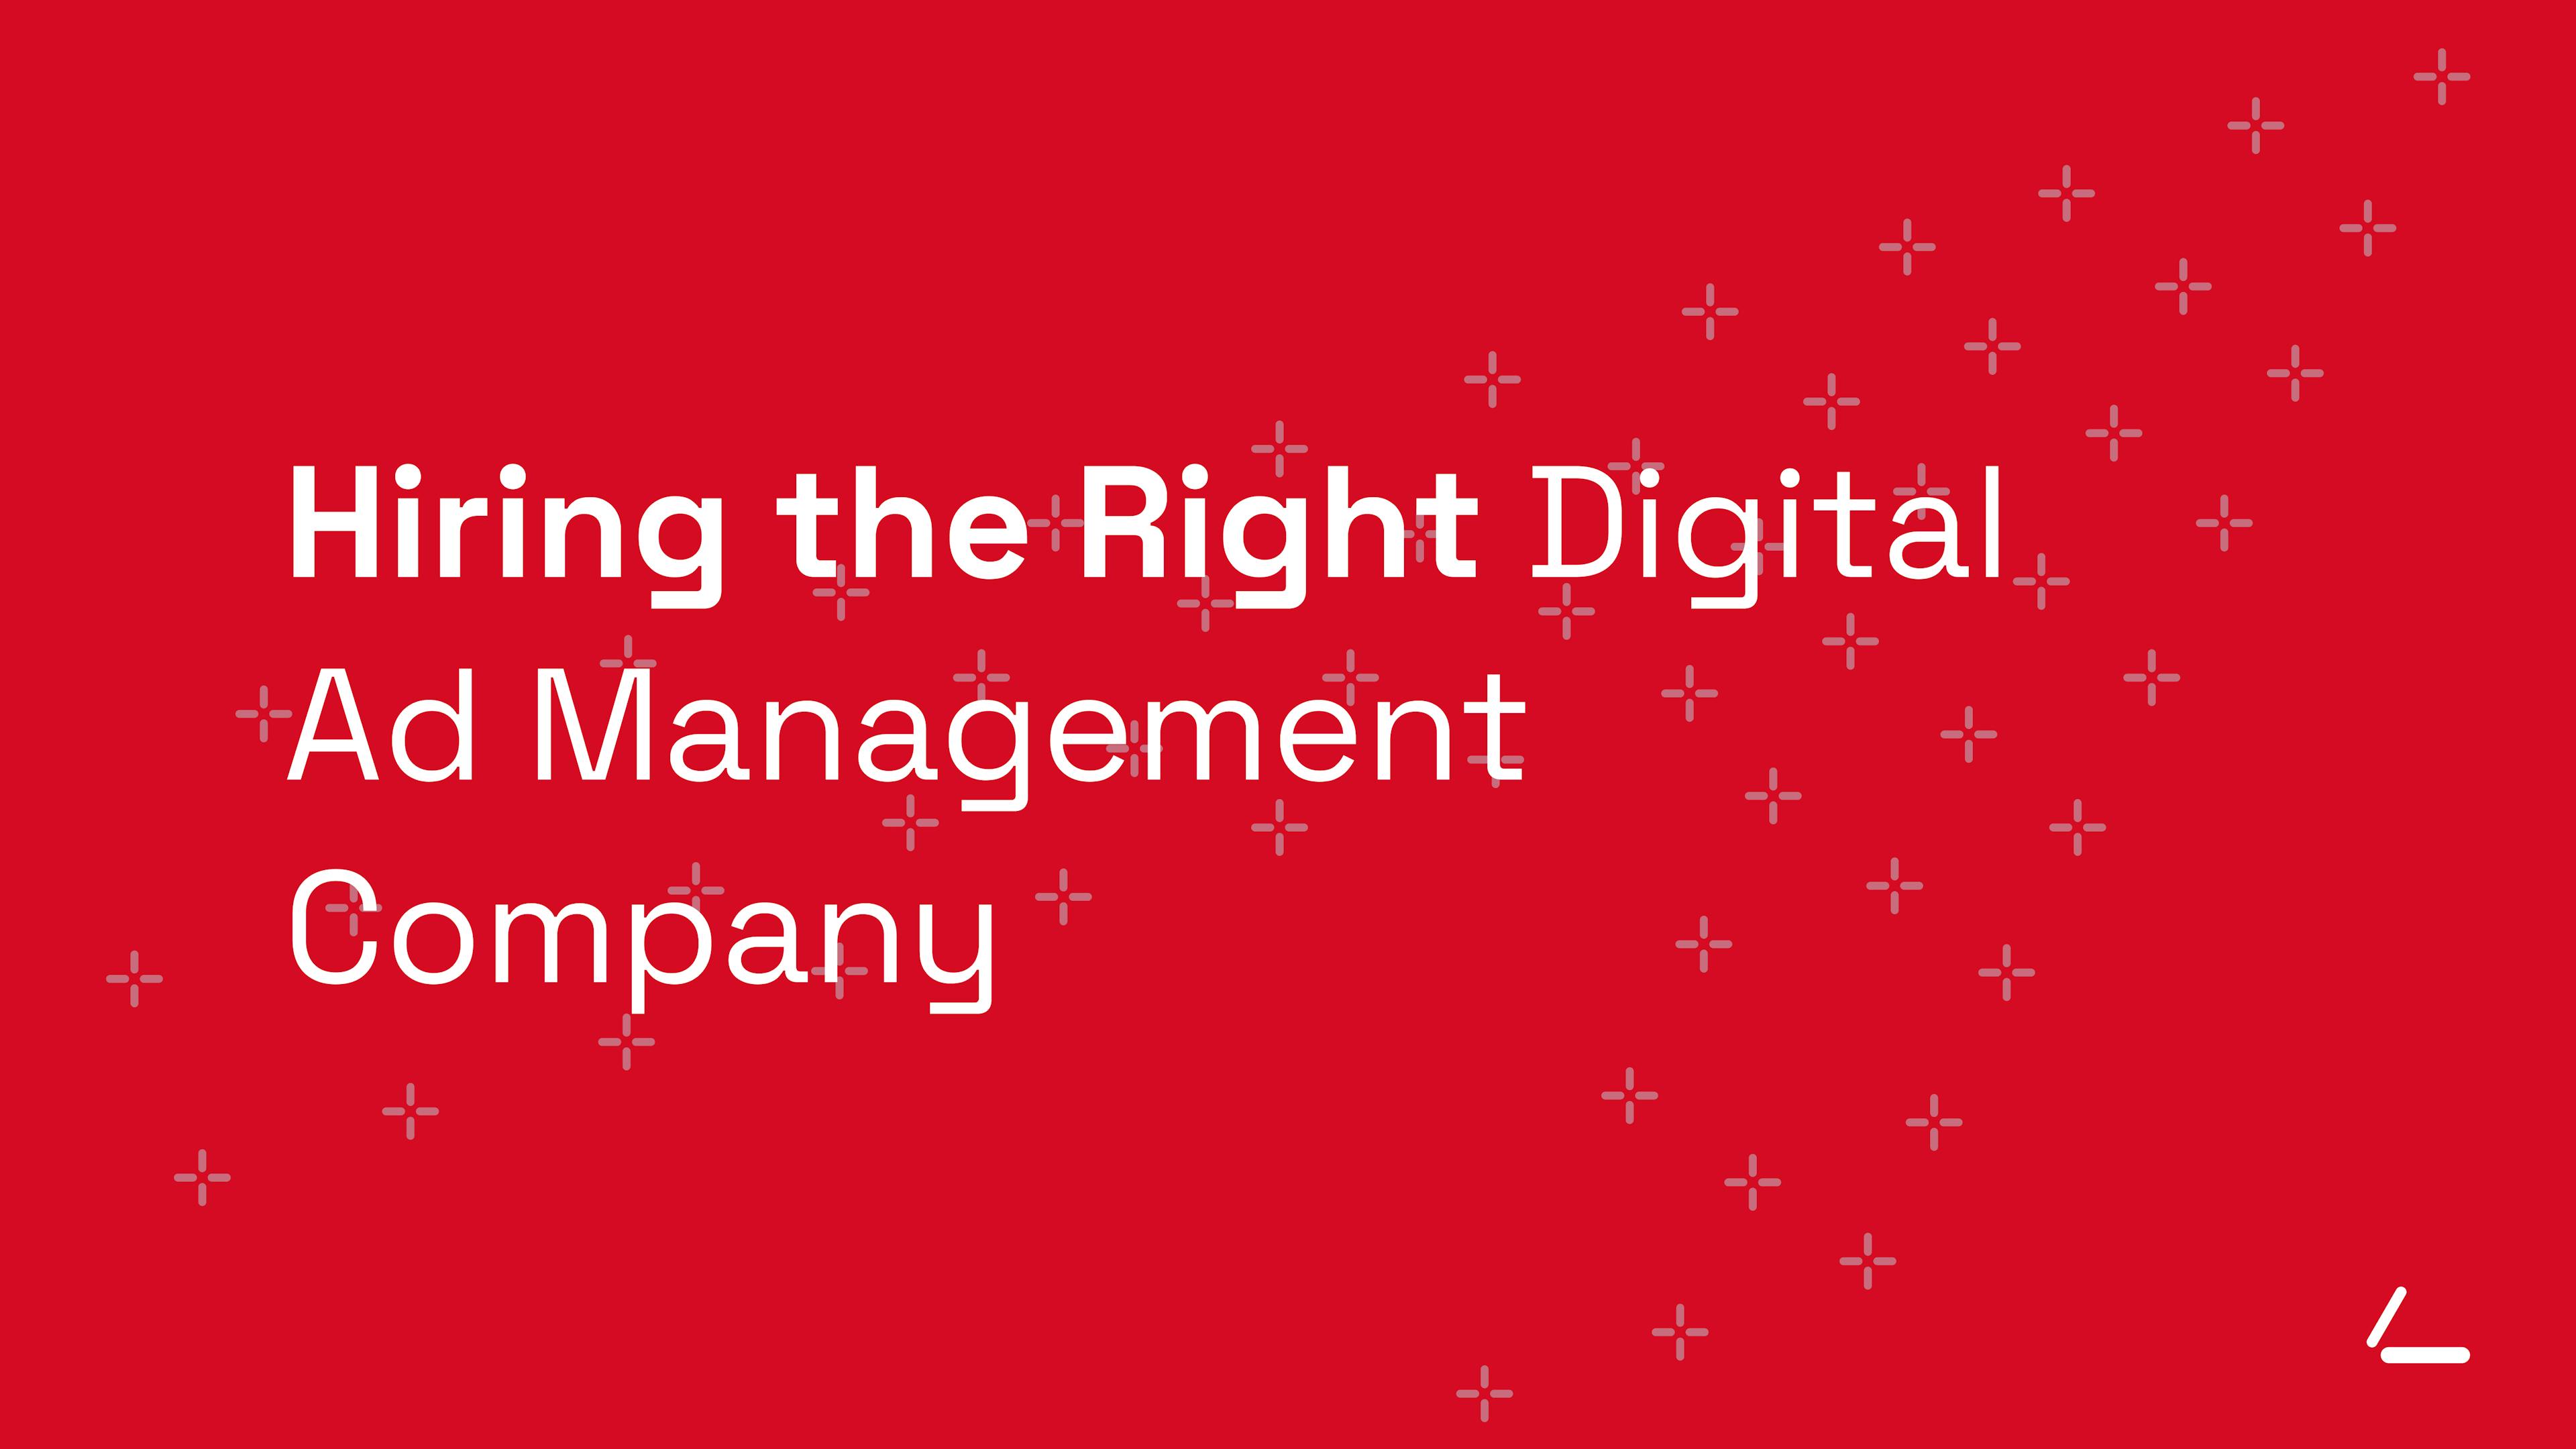 SEO Article Header - Red background with text about hiring the right digital ad management company.